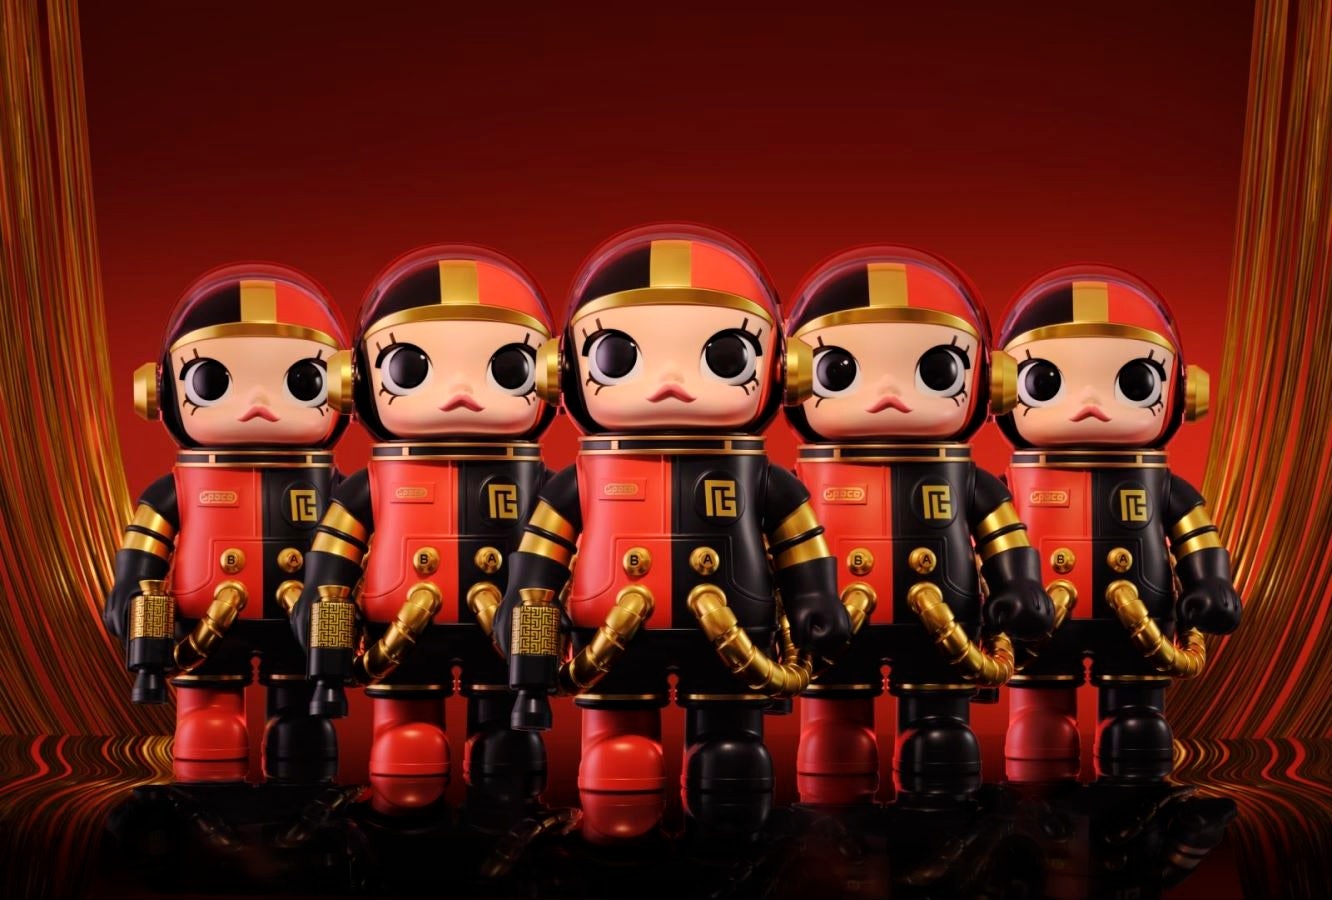 For New Year, Balmain and Pop Mart have designed a limited edition series of Mega Space Molly figurines. Photo: Balmain